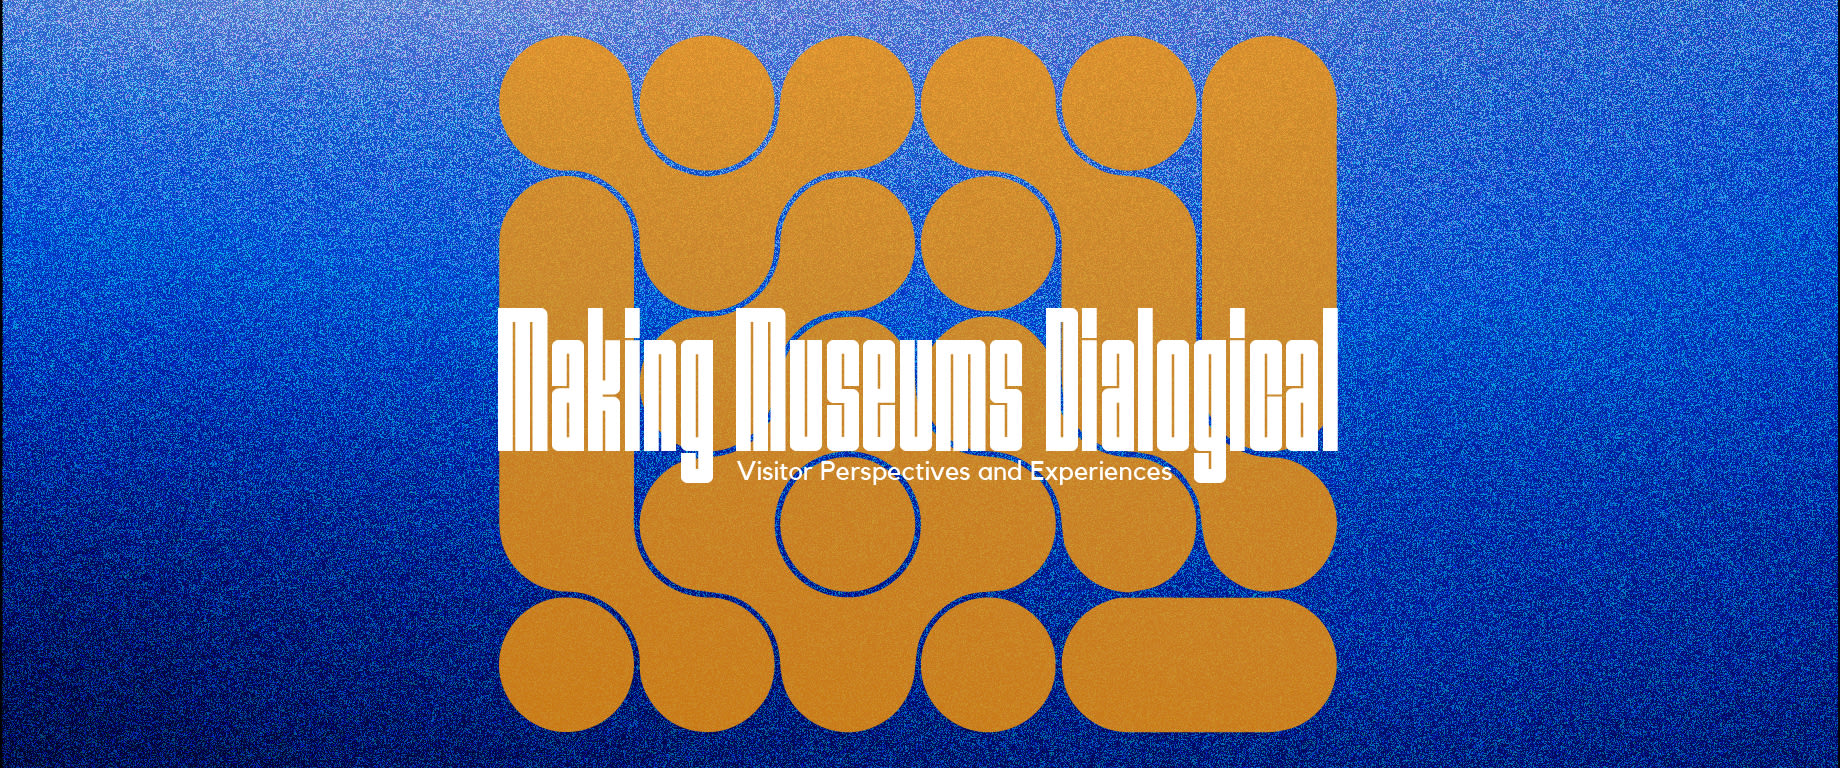 Making Museums Dialogical